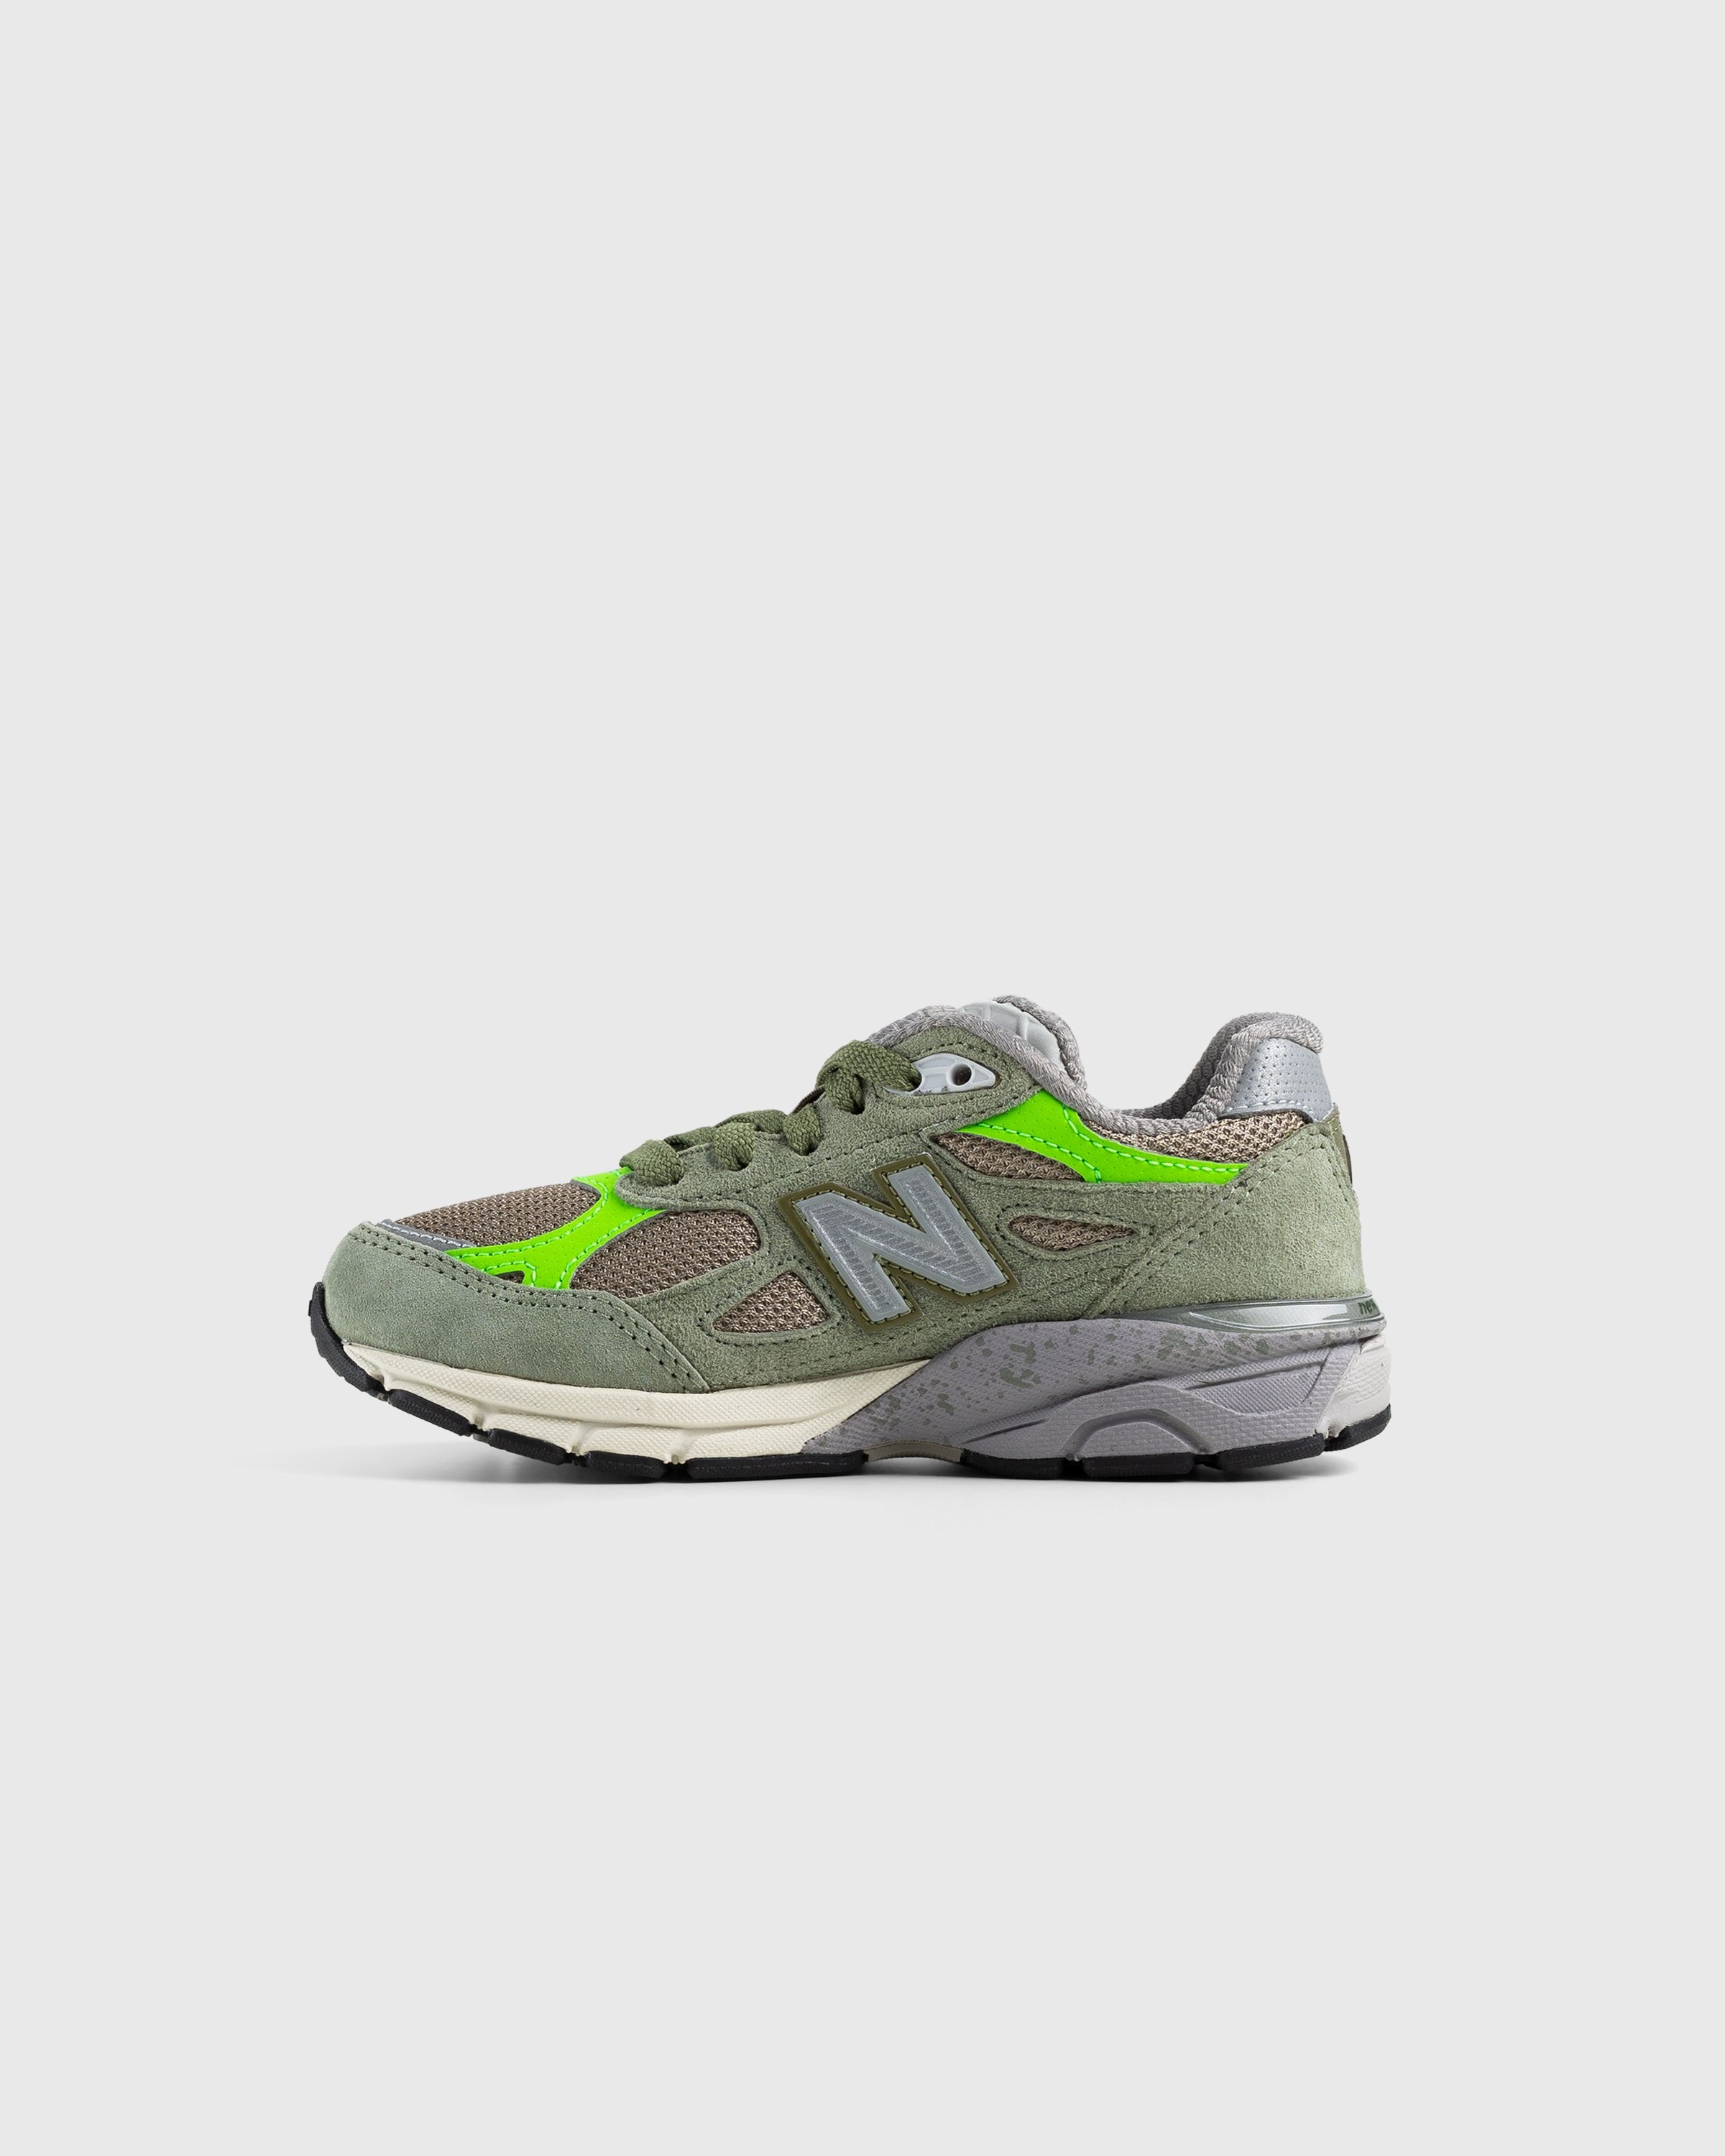 Patta x New Balance – Made in USA 990v3 Olive/White Pepper - Sneakers - Green - Image 5